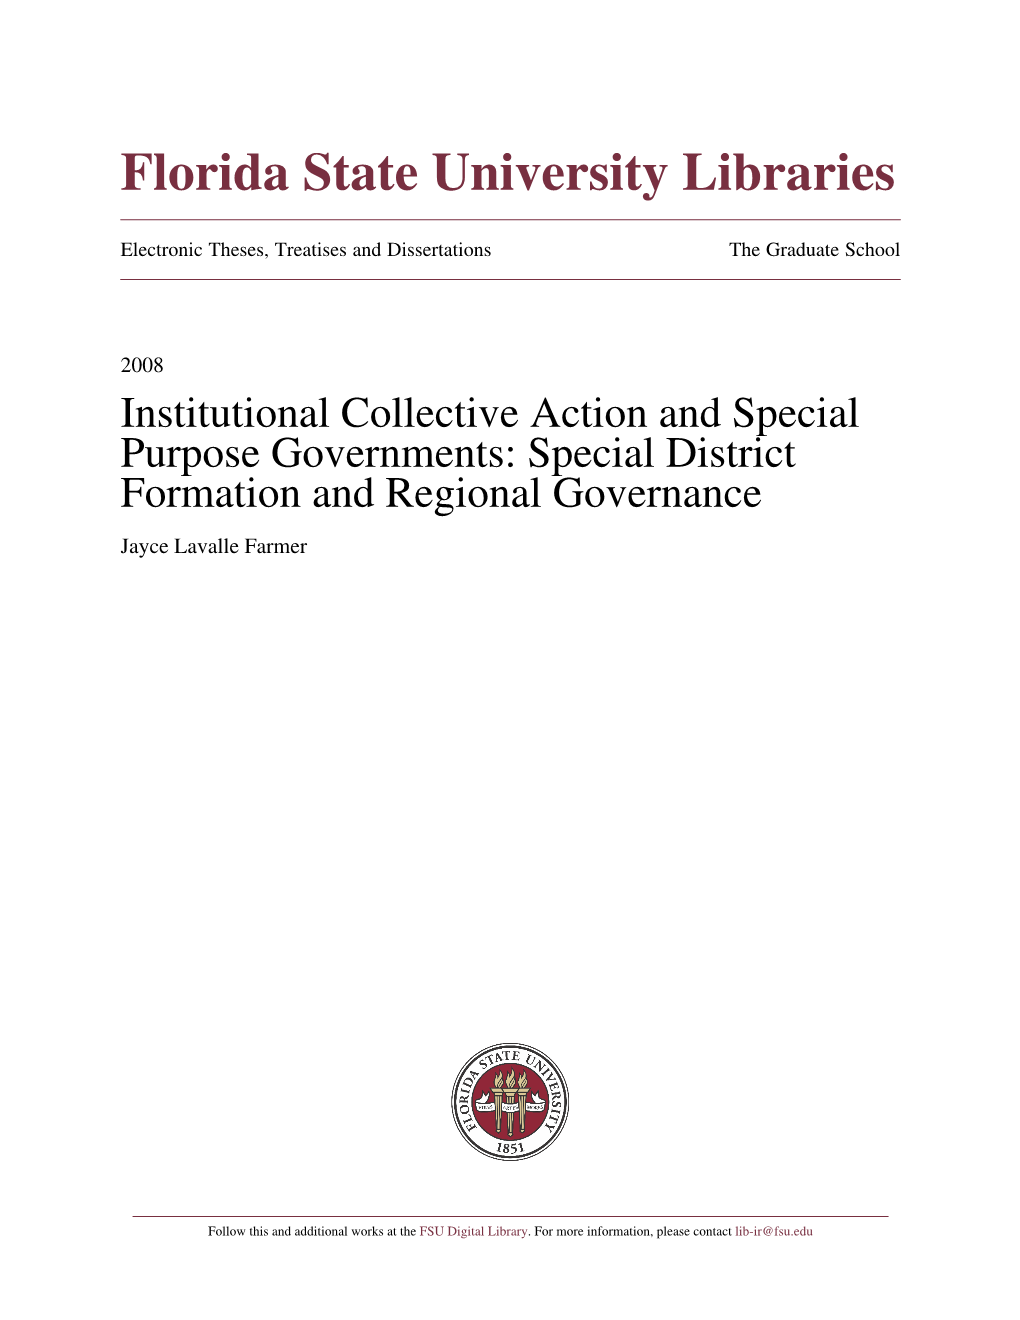 Institutional Collective Action and Special Purpose Governments: Special District Formation and Regional Governance Jayce Lavalle Farmer